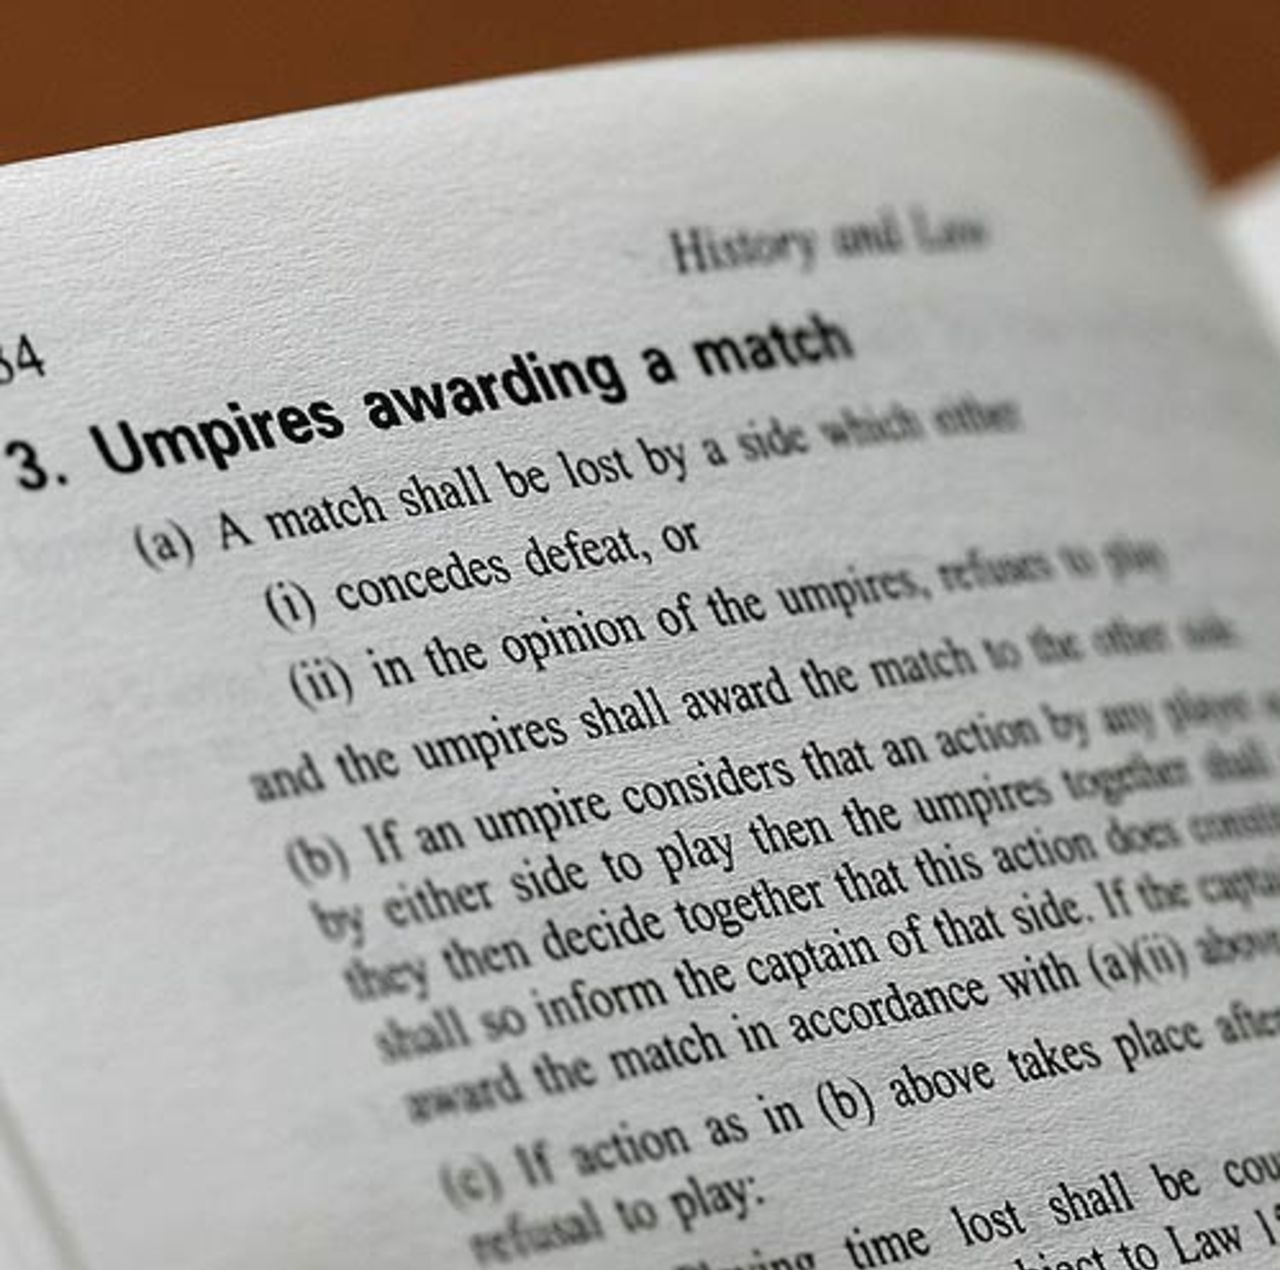 The law which relates to the umpires awarding a match, England v Pakistan, 4th Test, The Oval, August 21, 2006